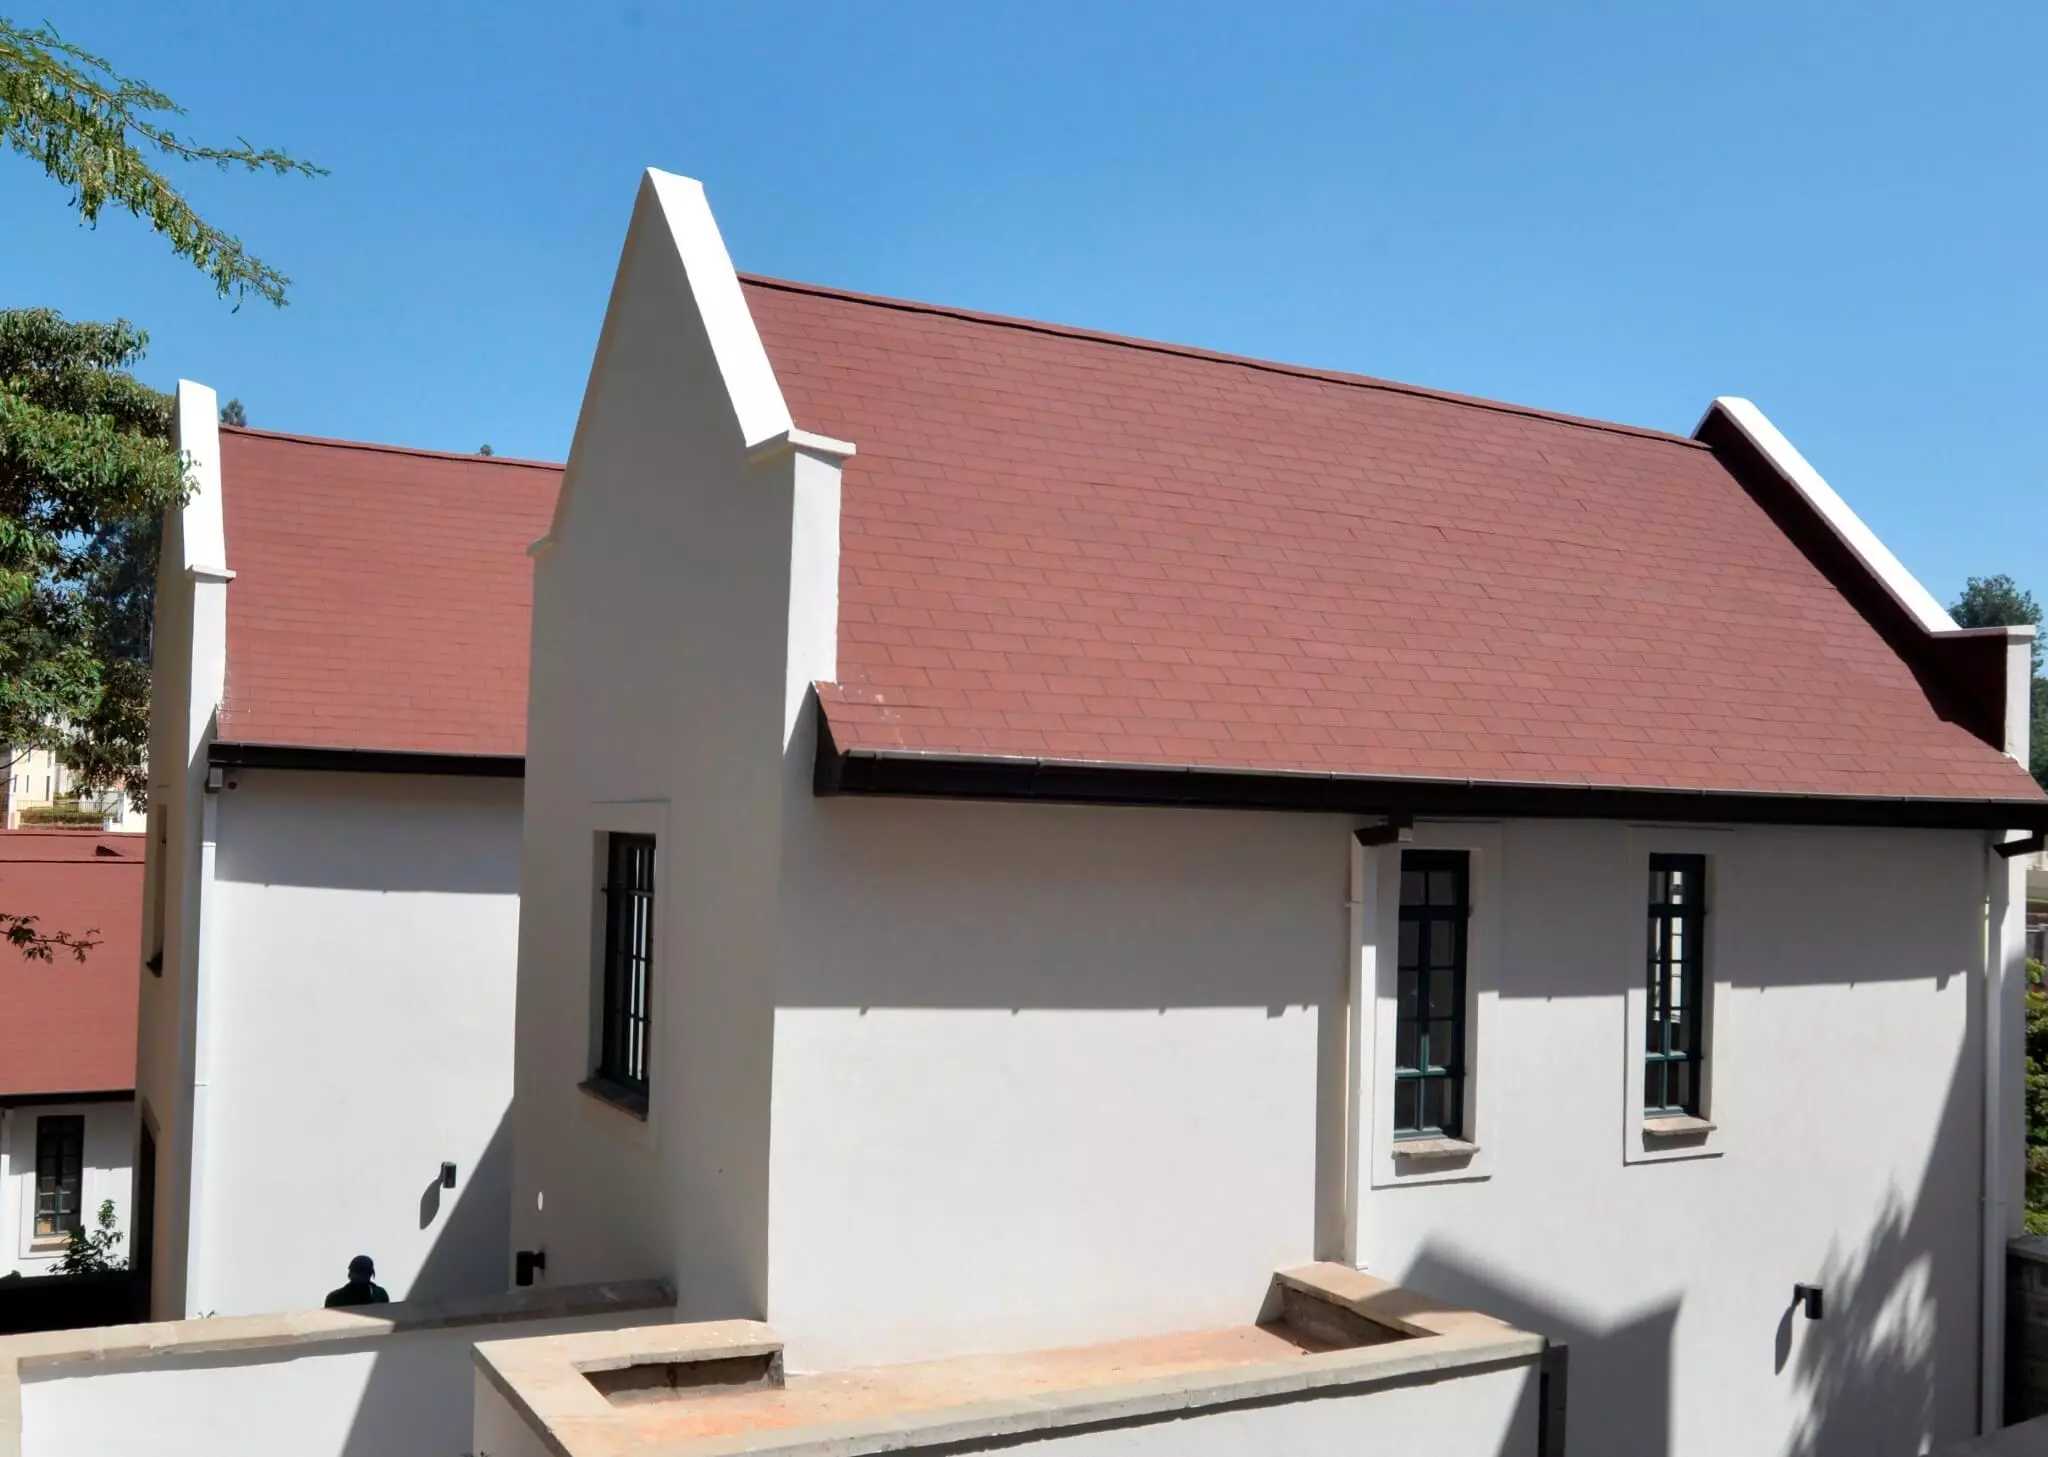 Superglass Roofing Shingles: Runda Roofing Project